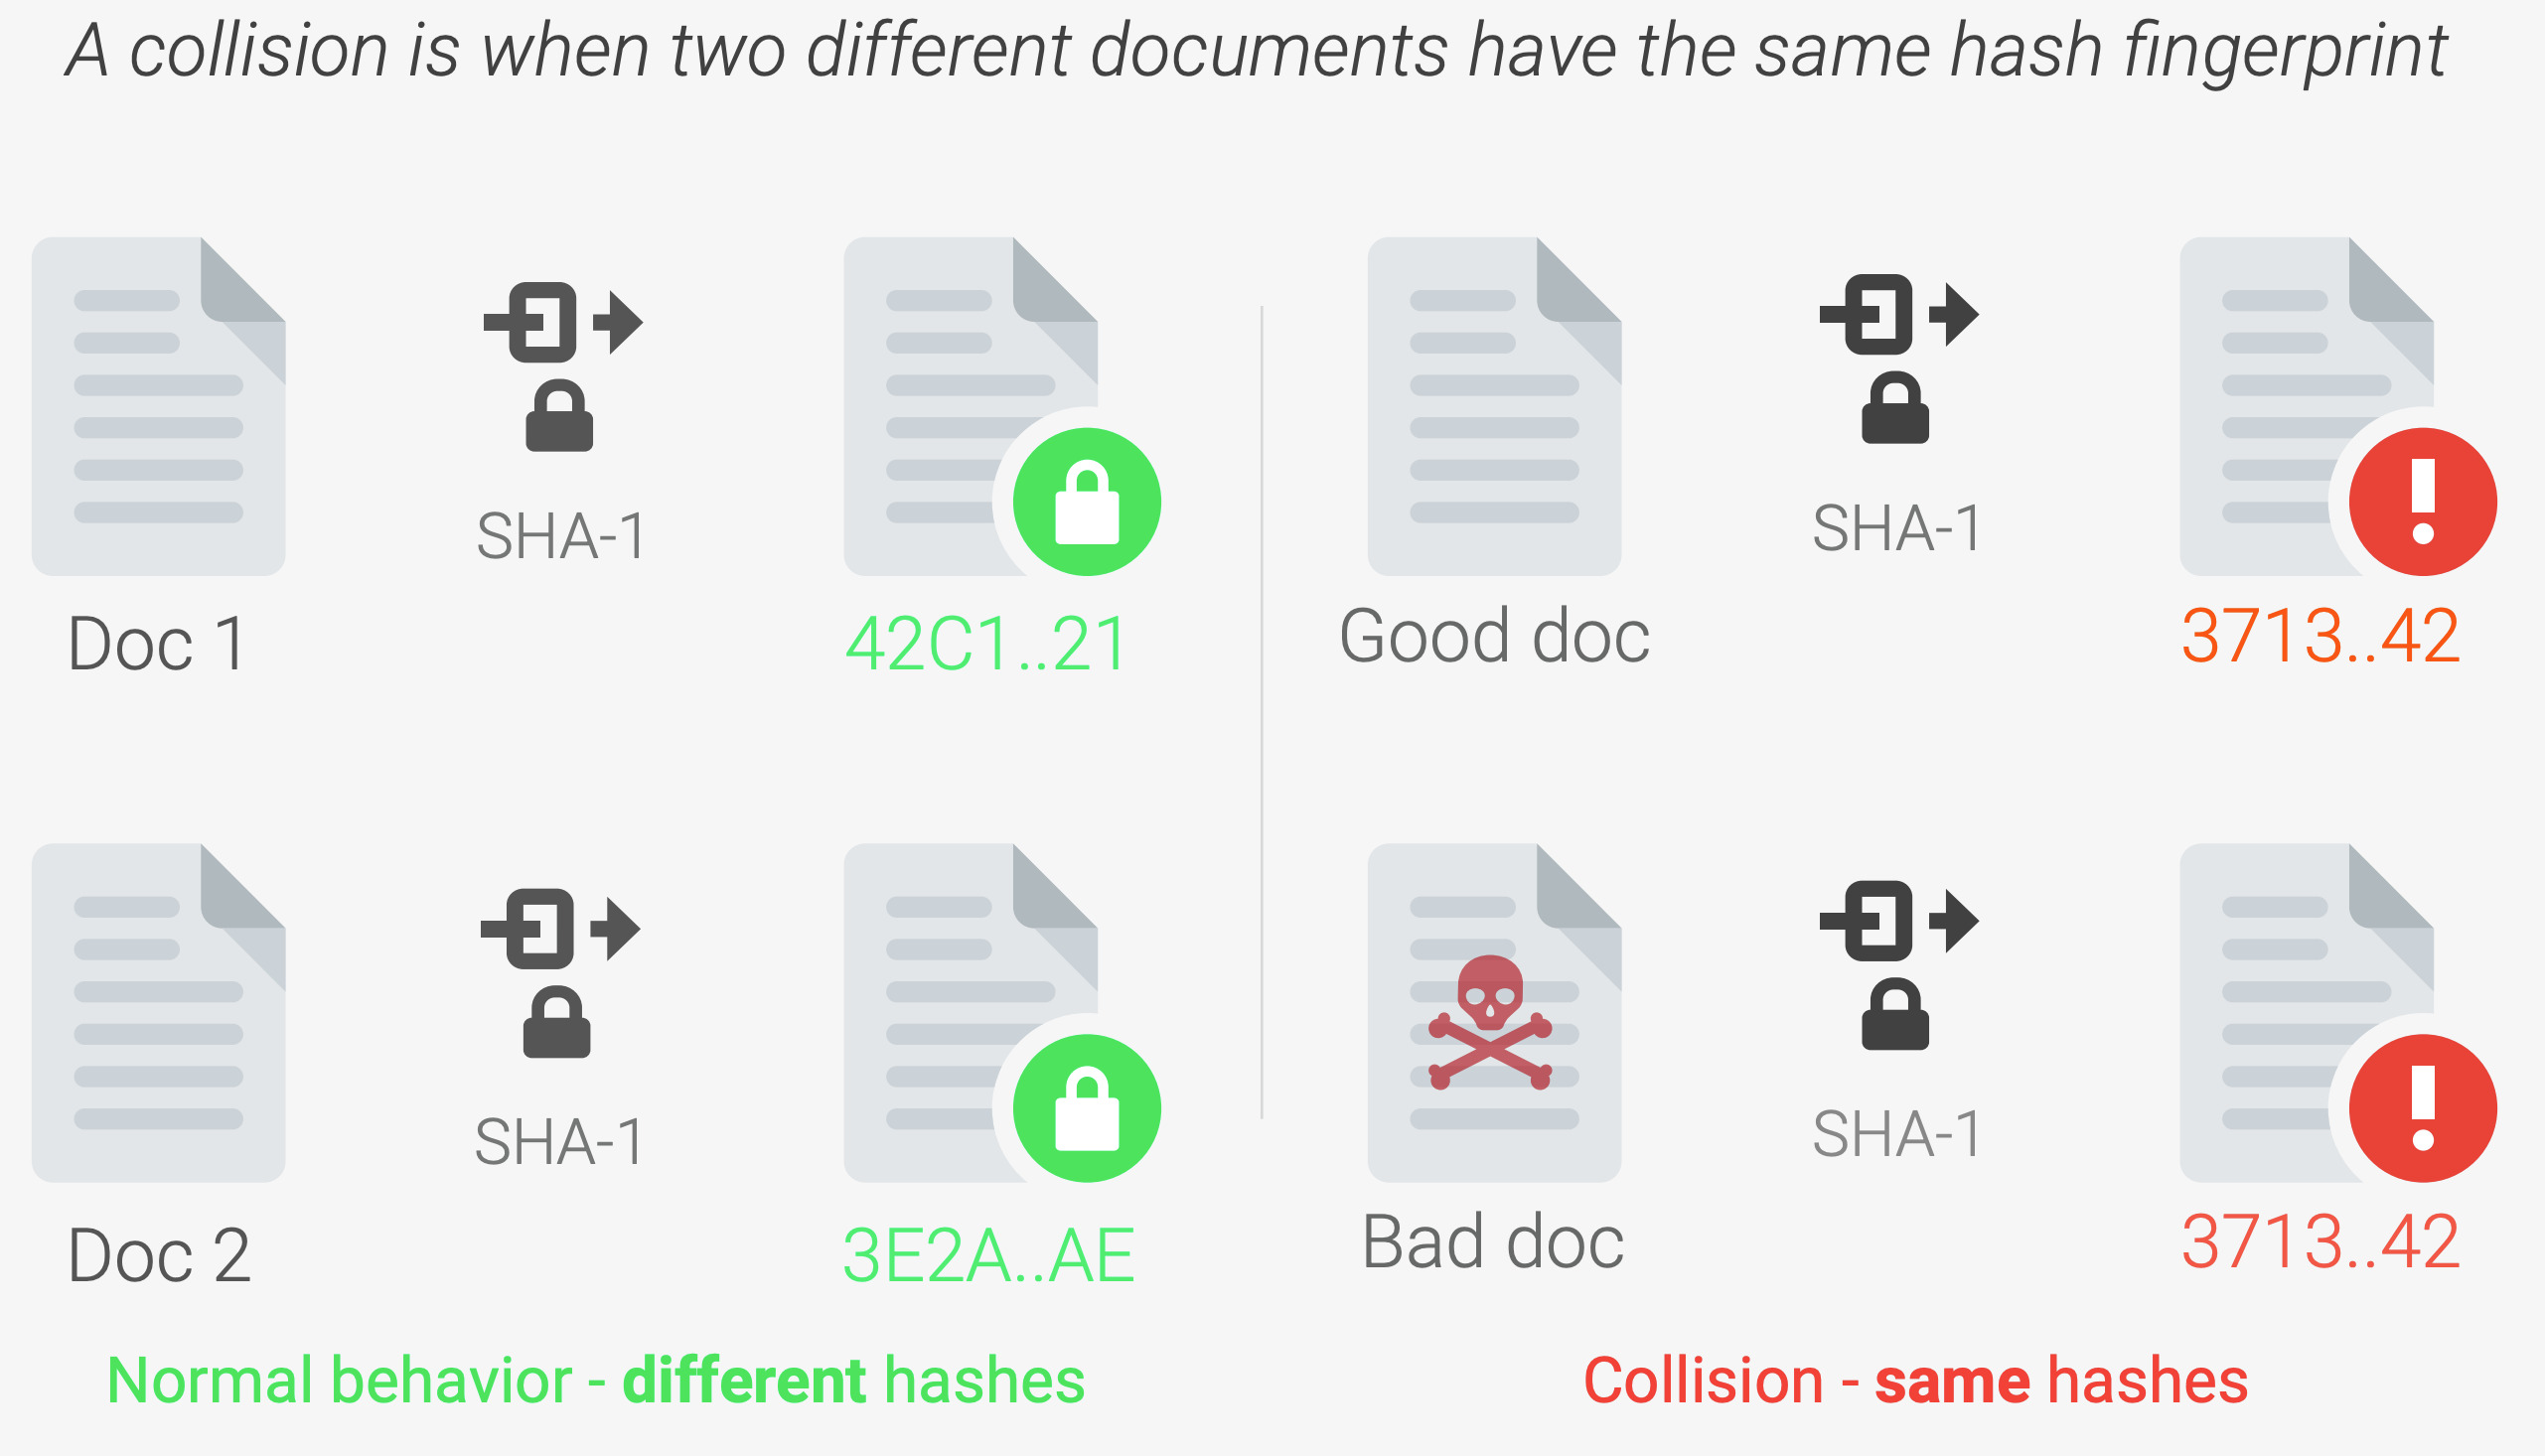 SHAttered info-graphic of hash collisions